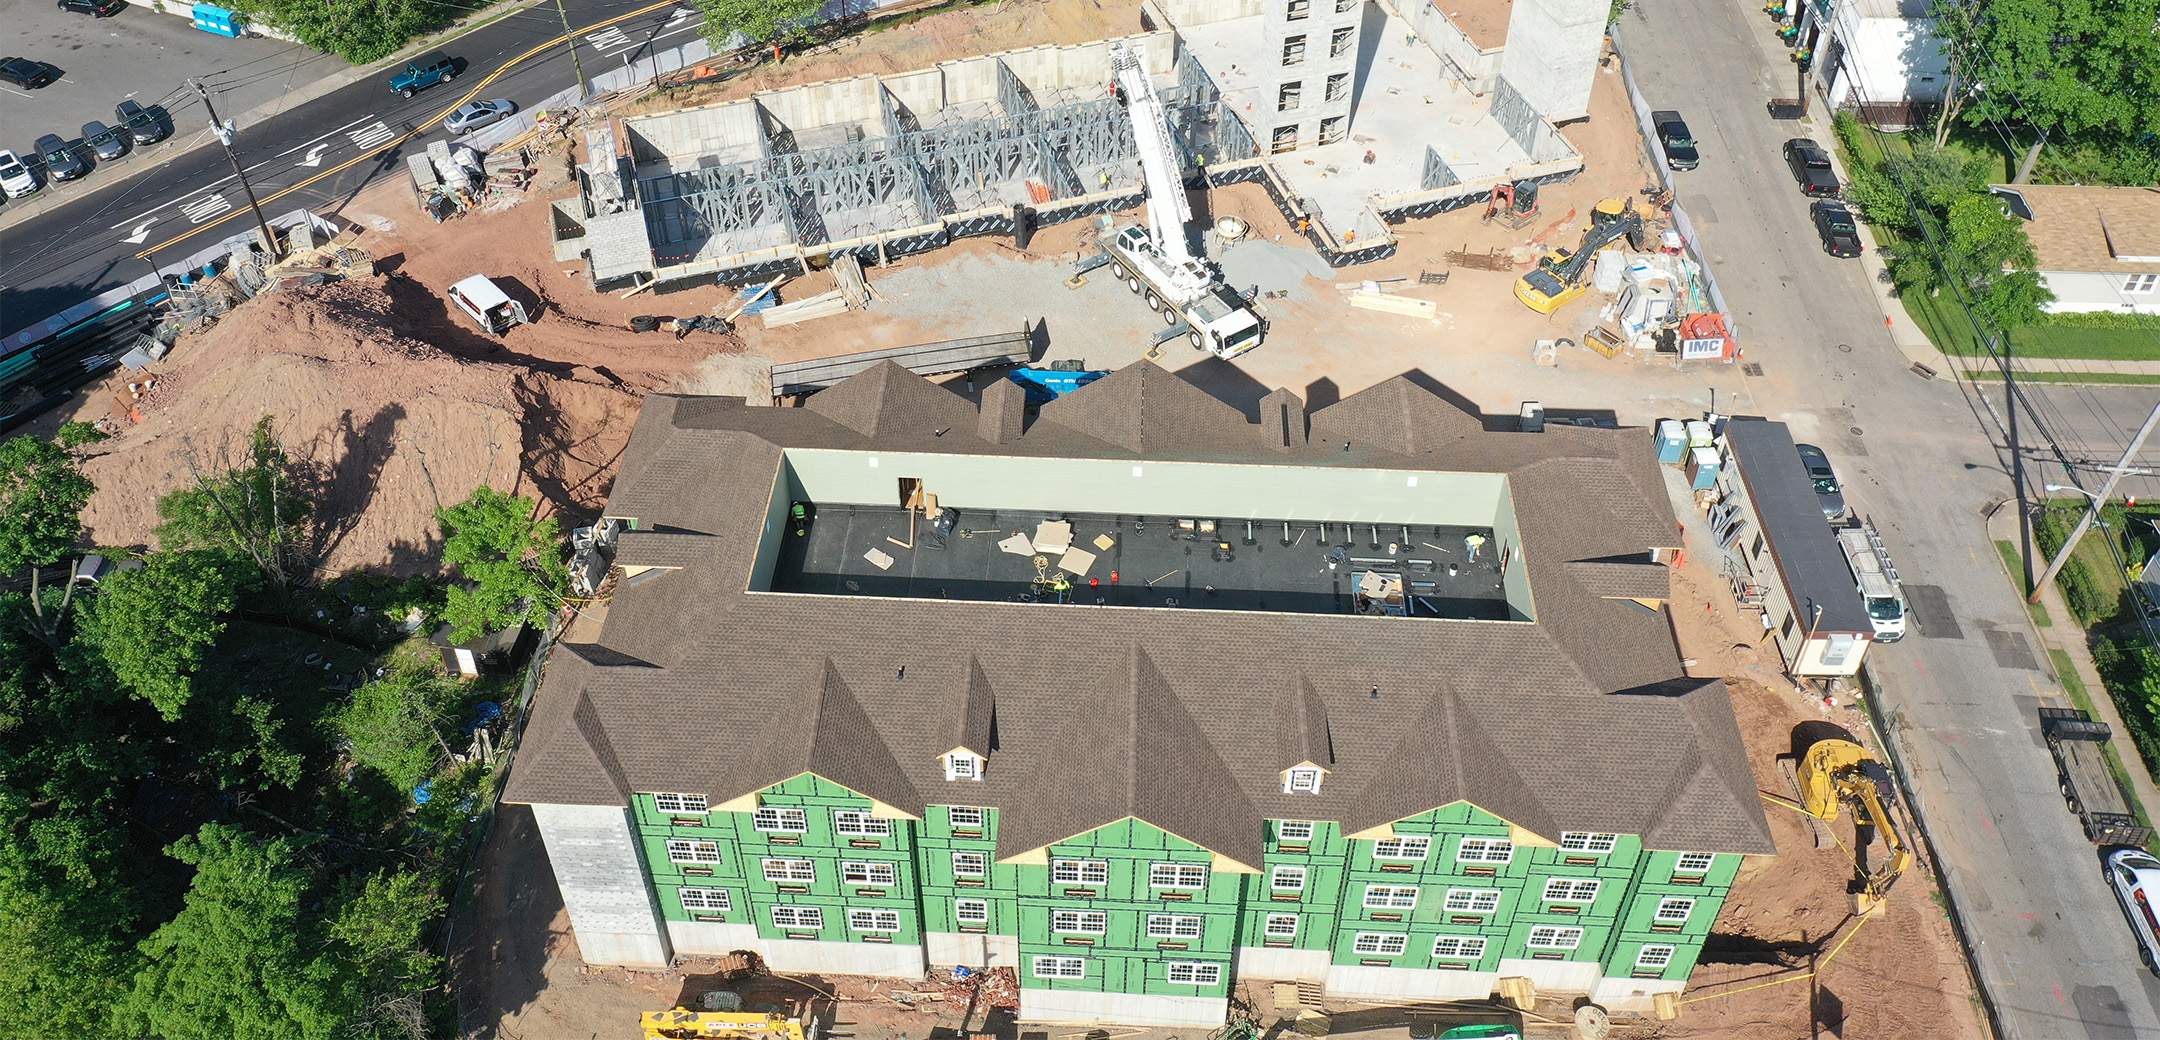 The aerial view of Chelsea Senior Living showing two buildings under construction, the front building with green exterior walls and the back building with white cement, no walls.